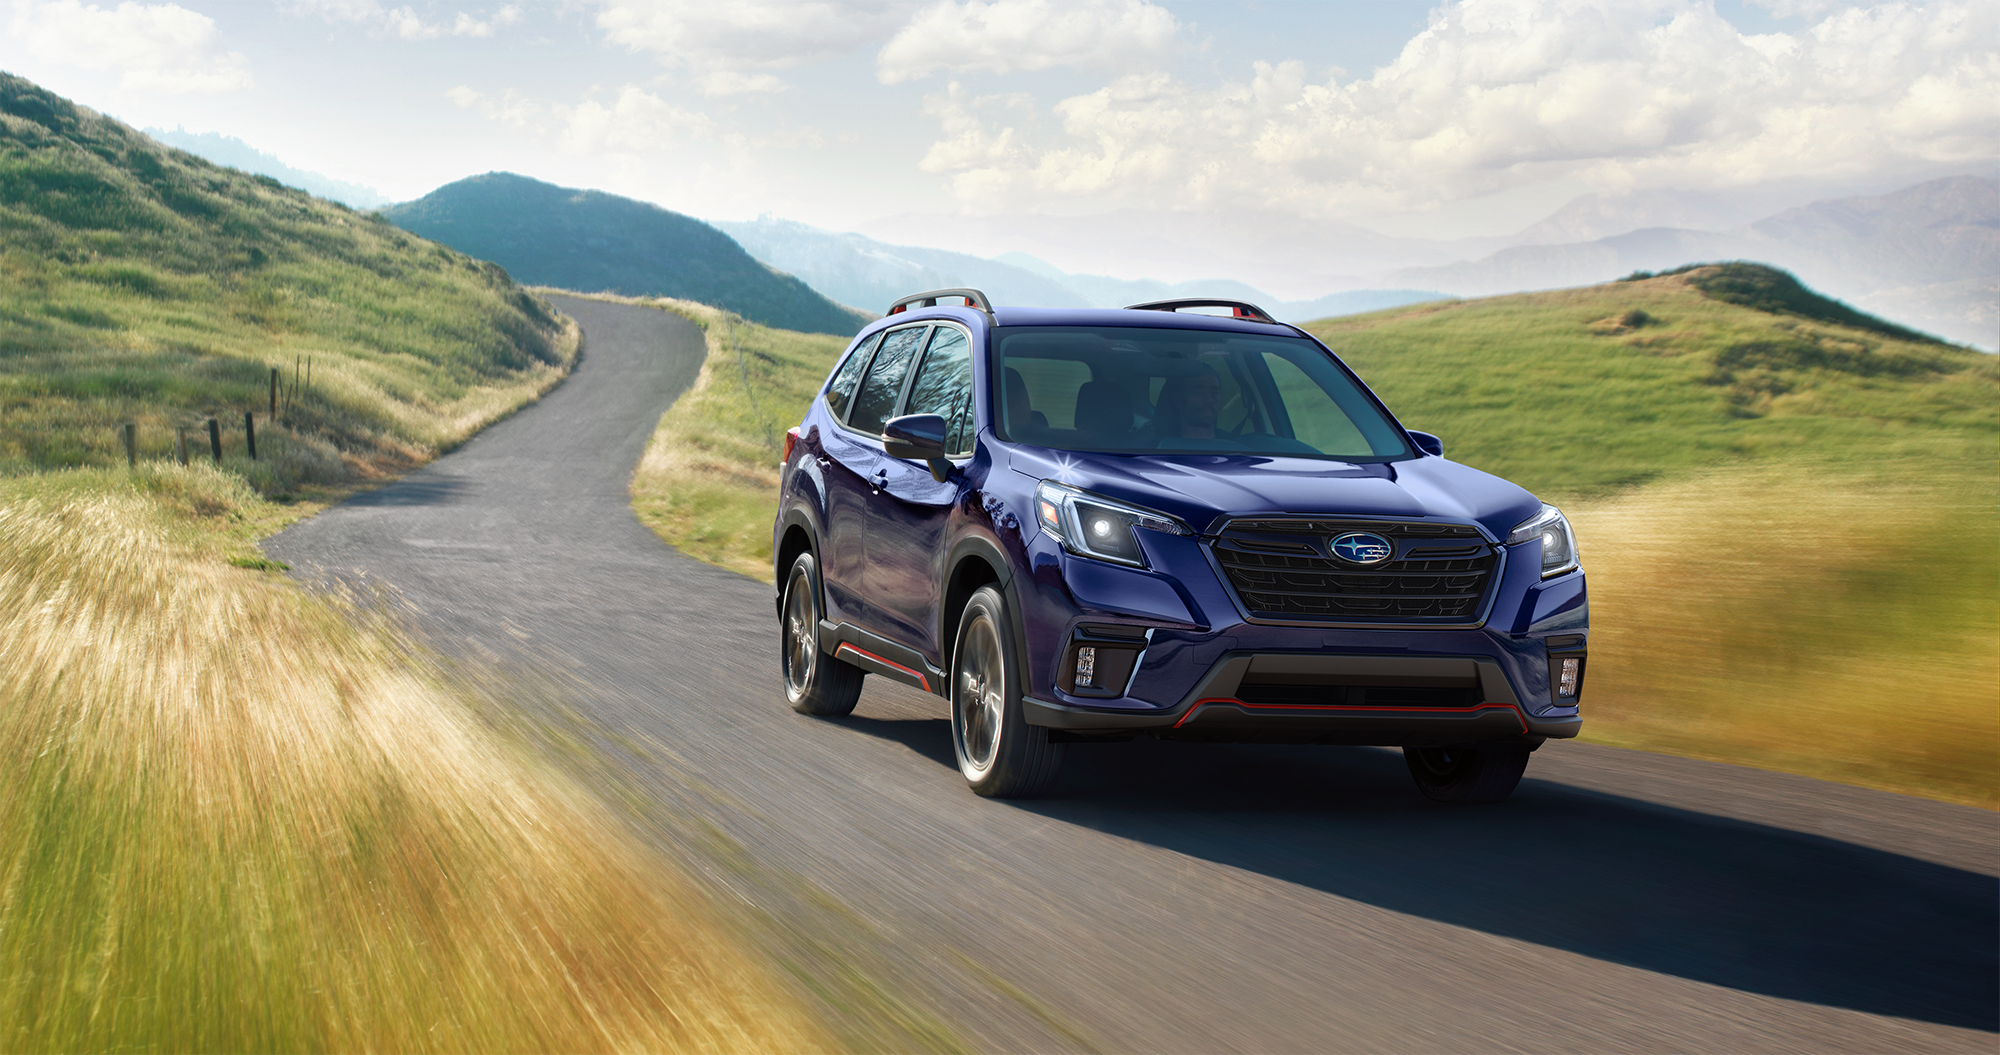 Facelifted 2022 Subaru Forester Illustrated Without The Camo